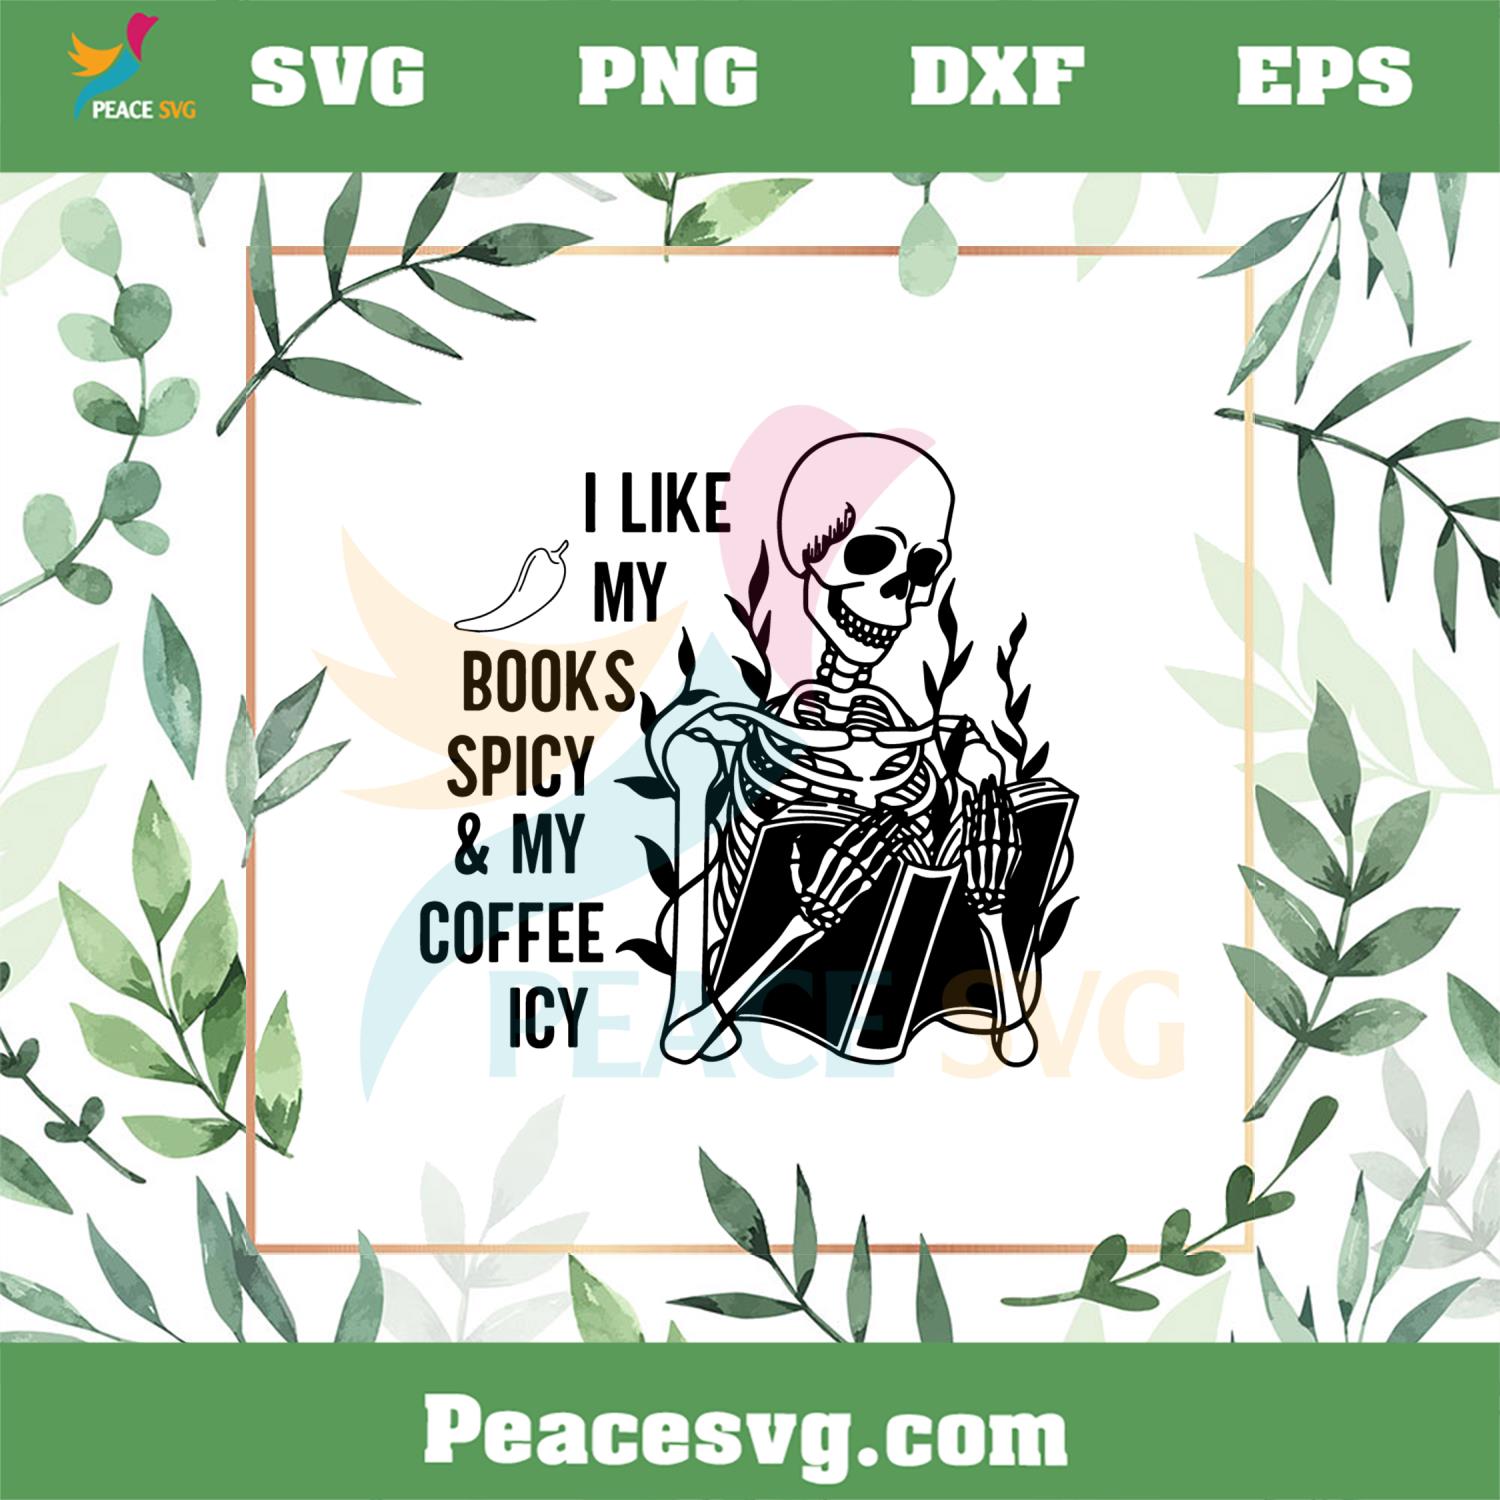 I Like My Books Spicy & My Coffee Icy SVG Cutting Files